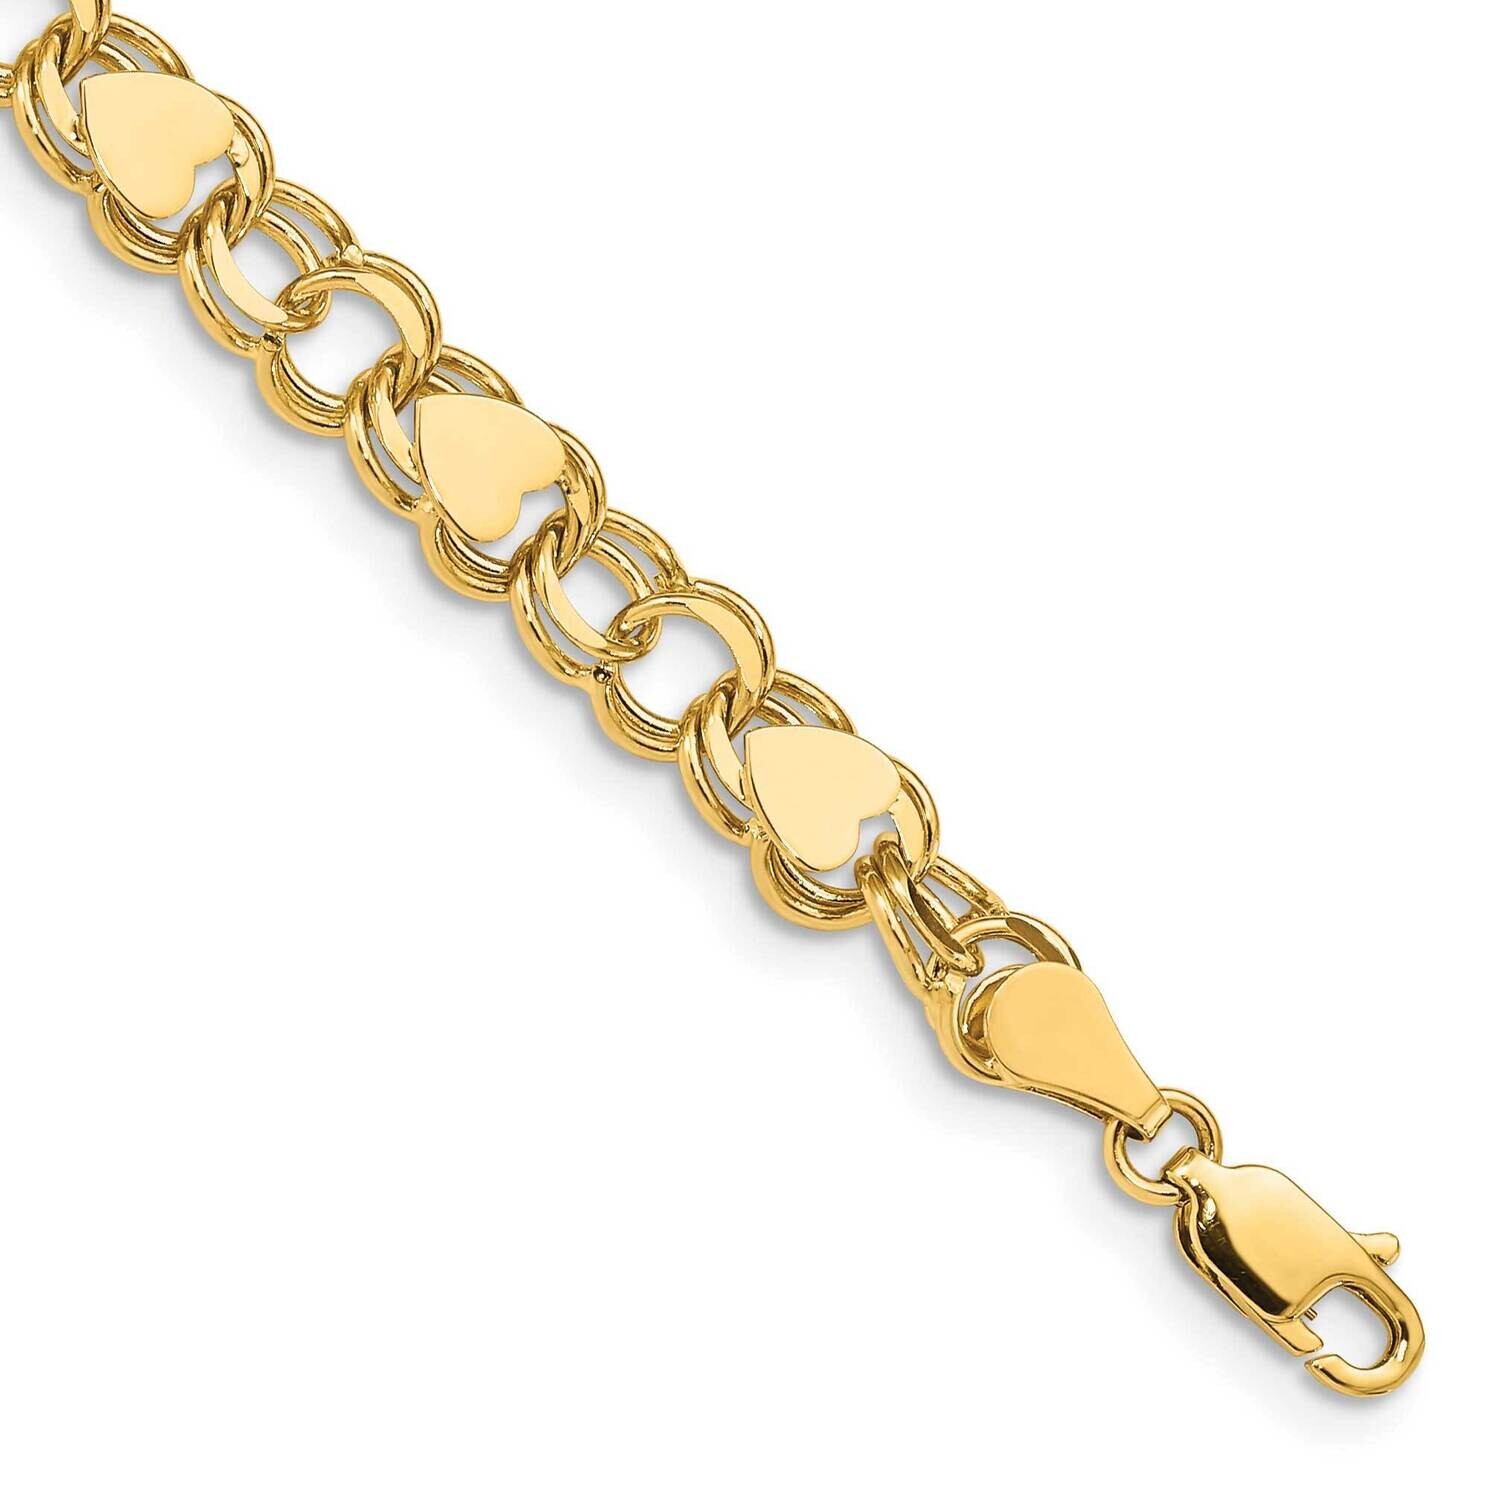 Double Link with Hearts Charm Bracelet 8 Inch 14k Gold DO501-8